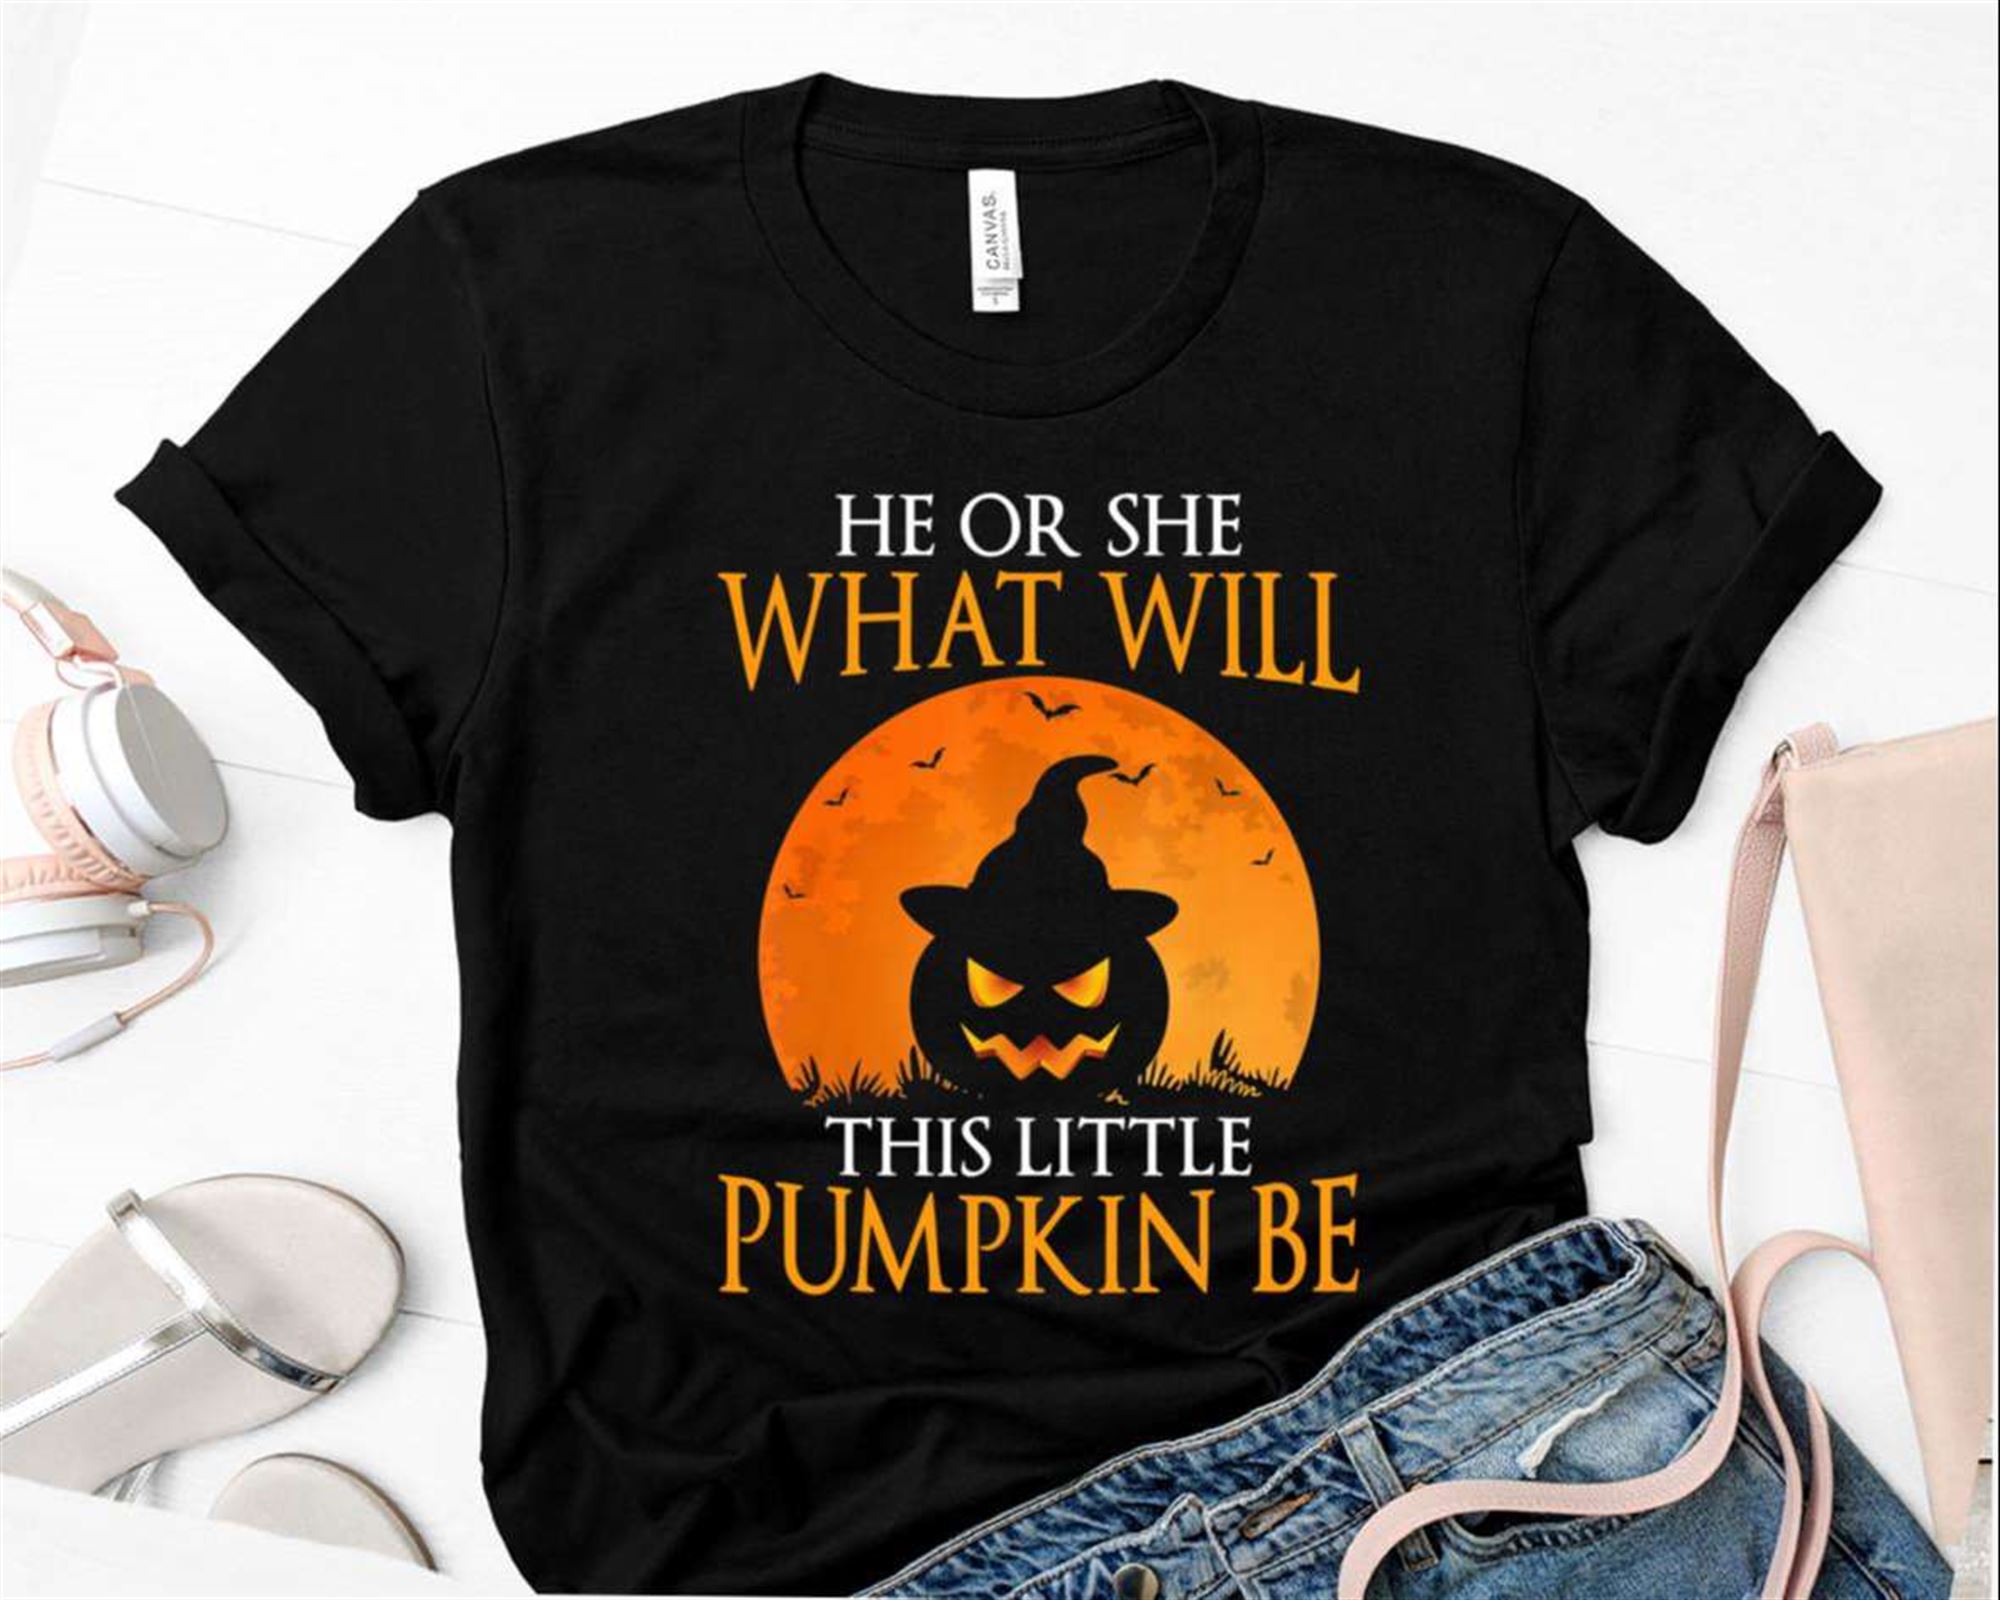 He Or She What Will This Little Pumpkin Be Top Gender Reveal Pregnancy Funny Halloween Party T-shirt Size Up To 5xl